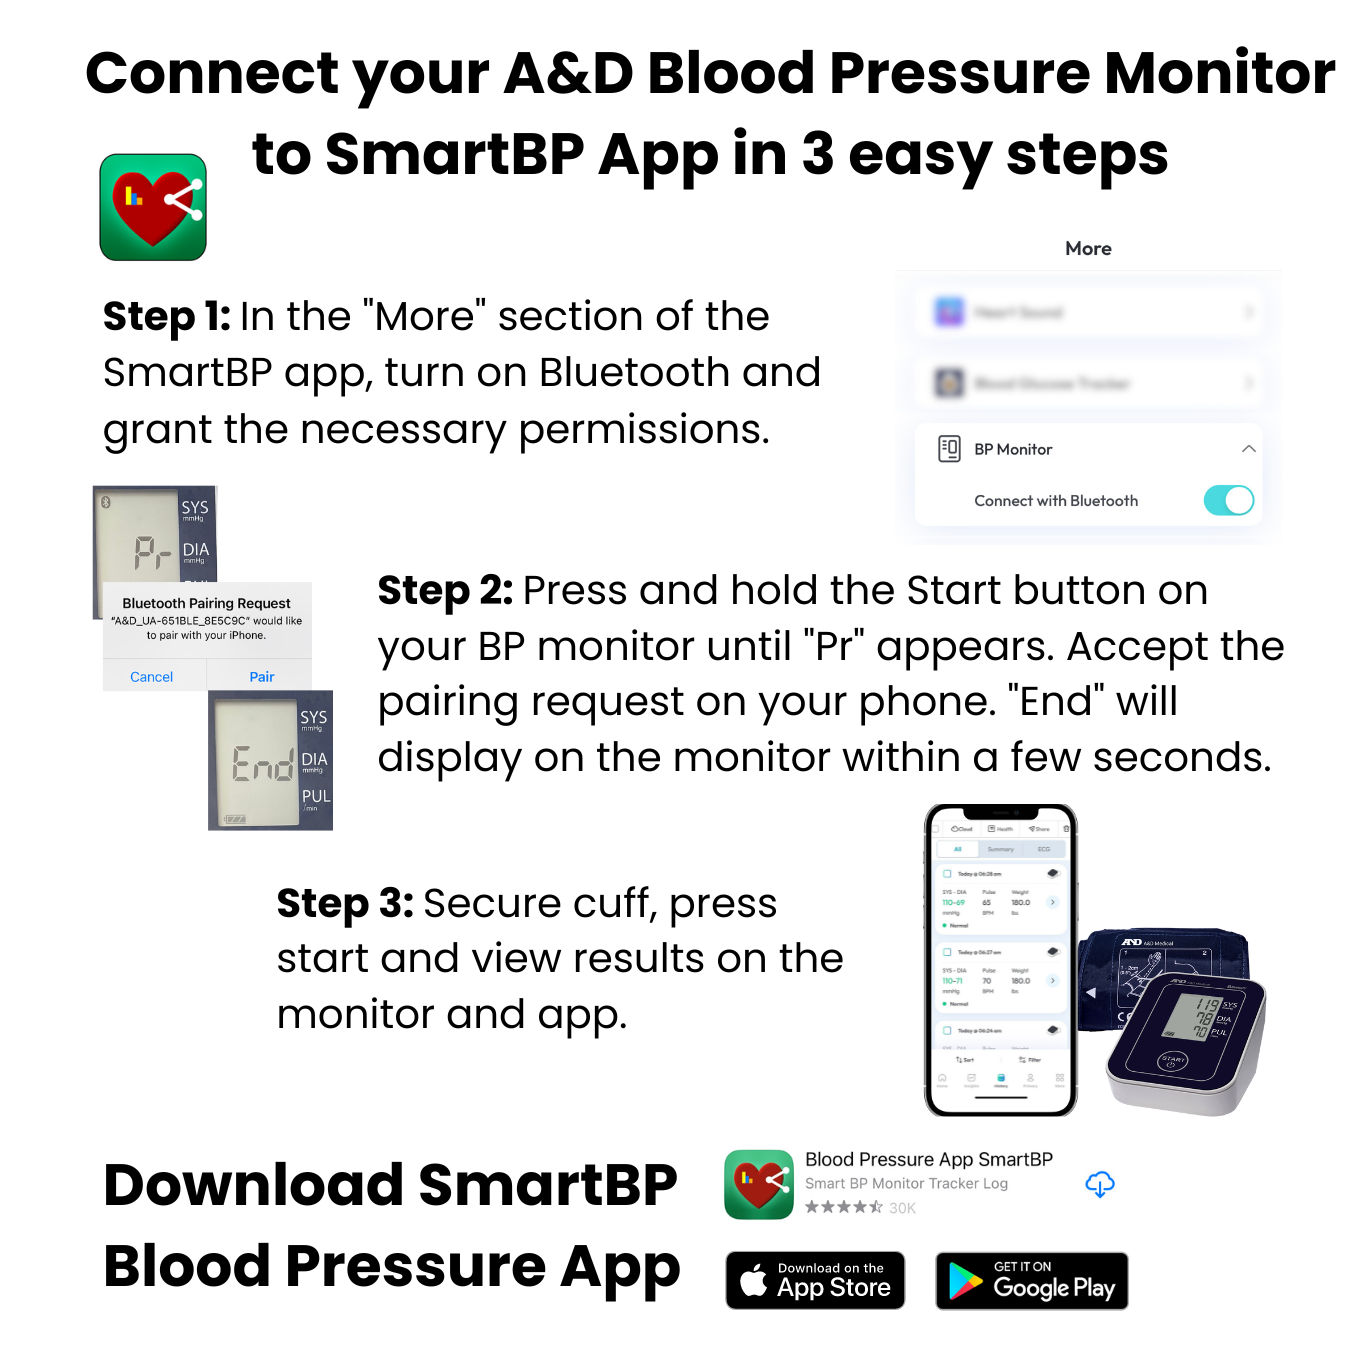 A&D Medical Upper Arm Blood Pressure Monitor with Wide Range Cuff